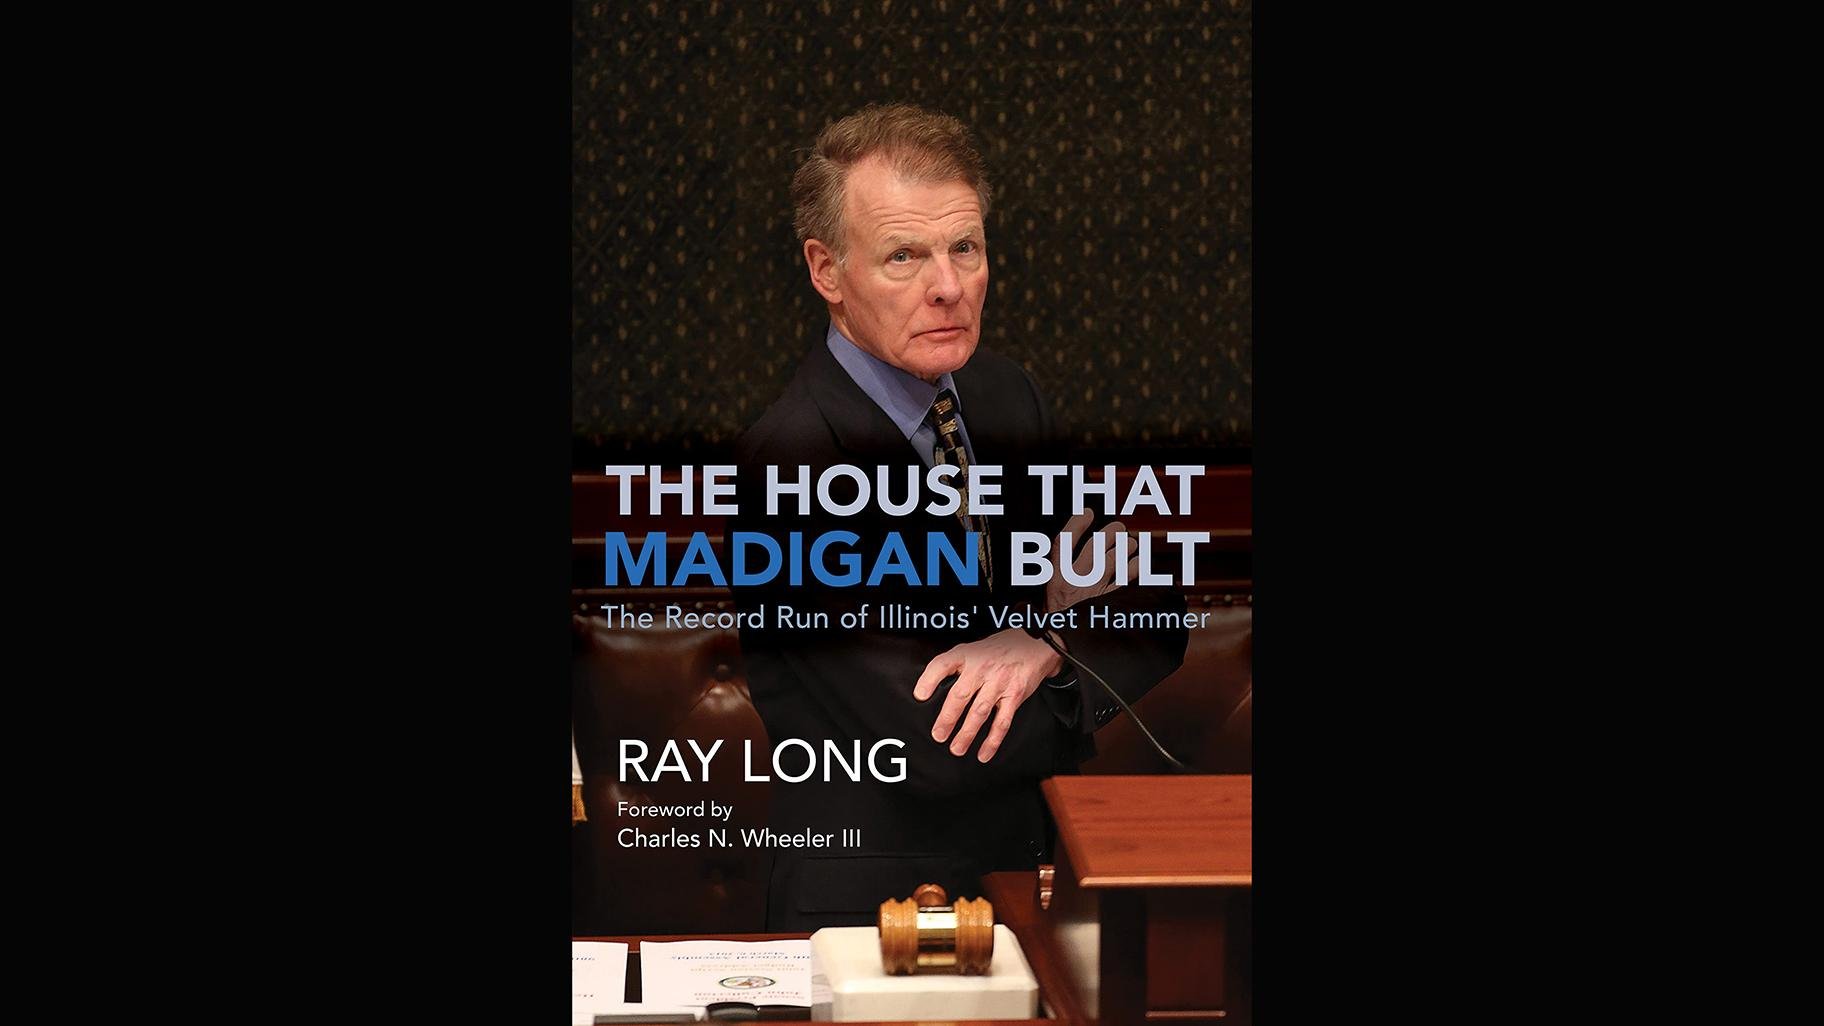 “The House that Madigan Built: The Record Run of Illinois’ Velvet Hammer” by Ray Long. (University of Illinois Press)